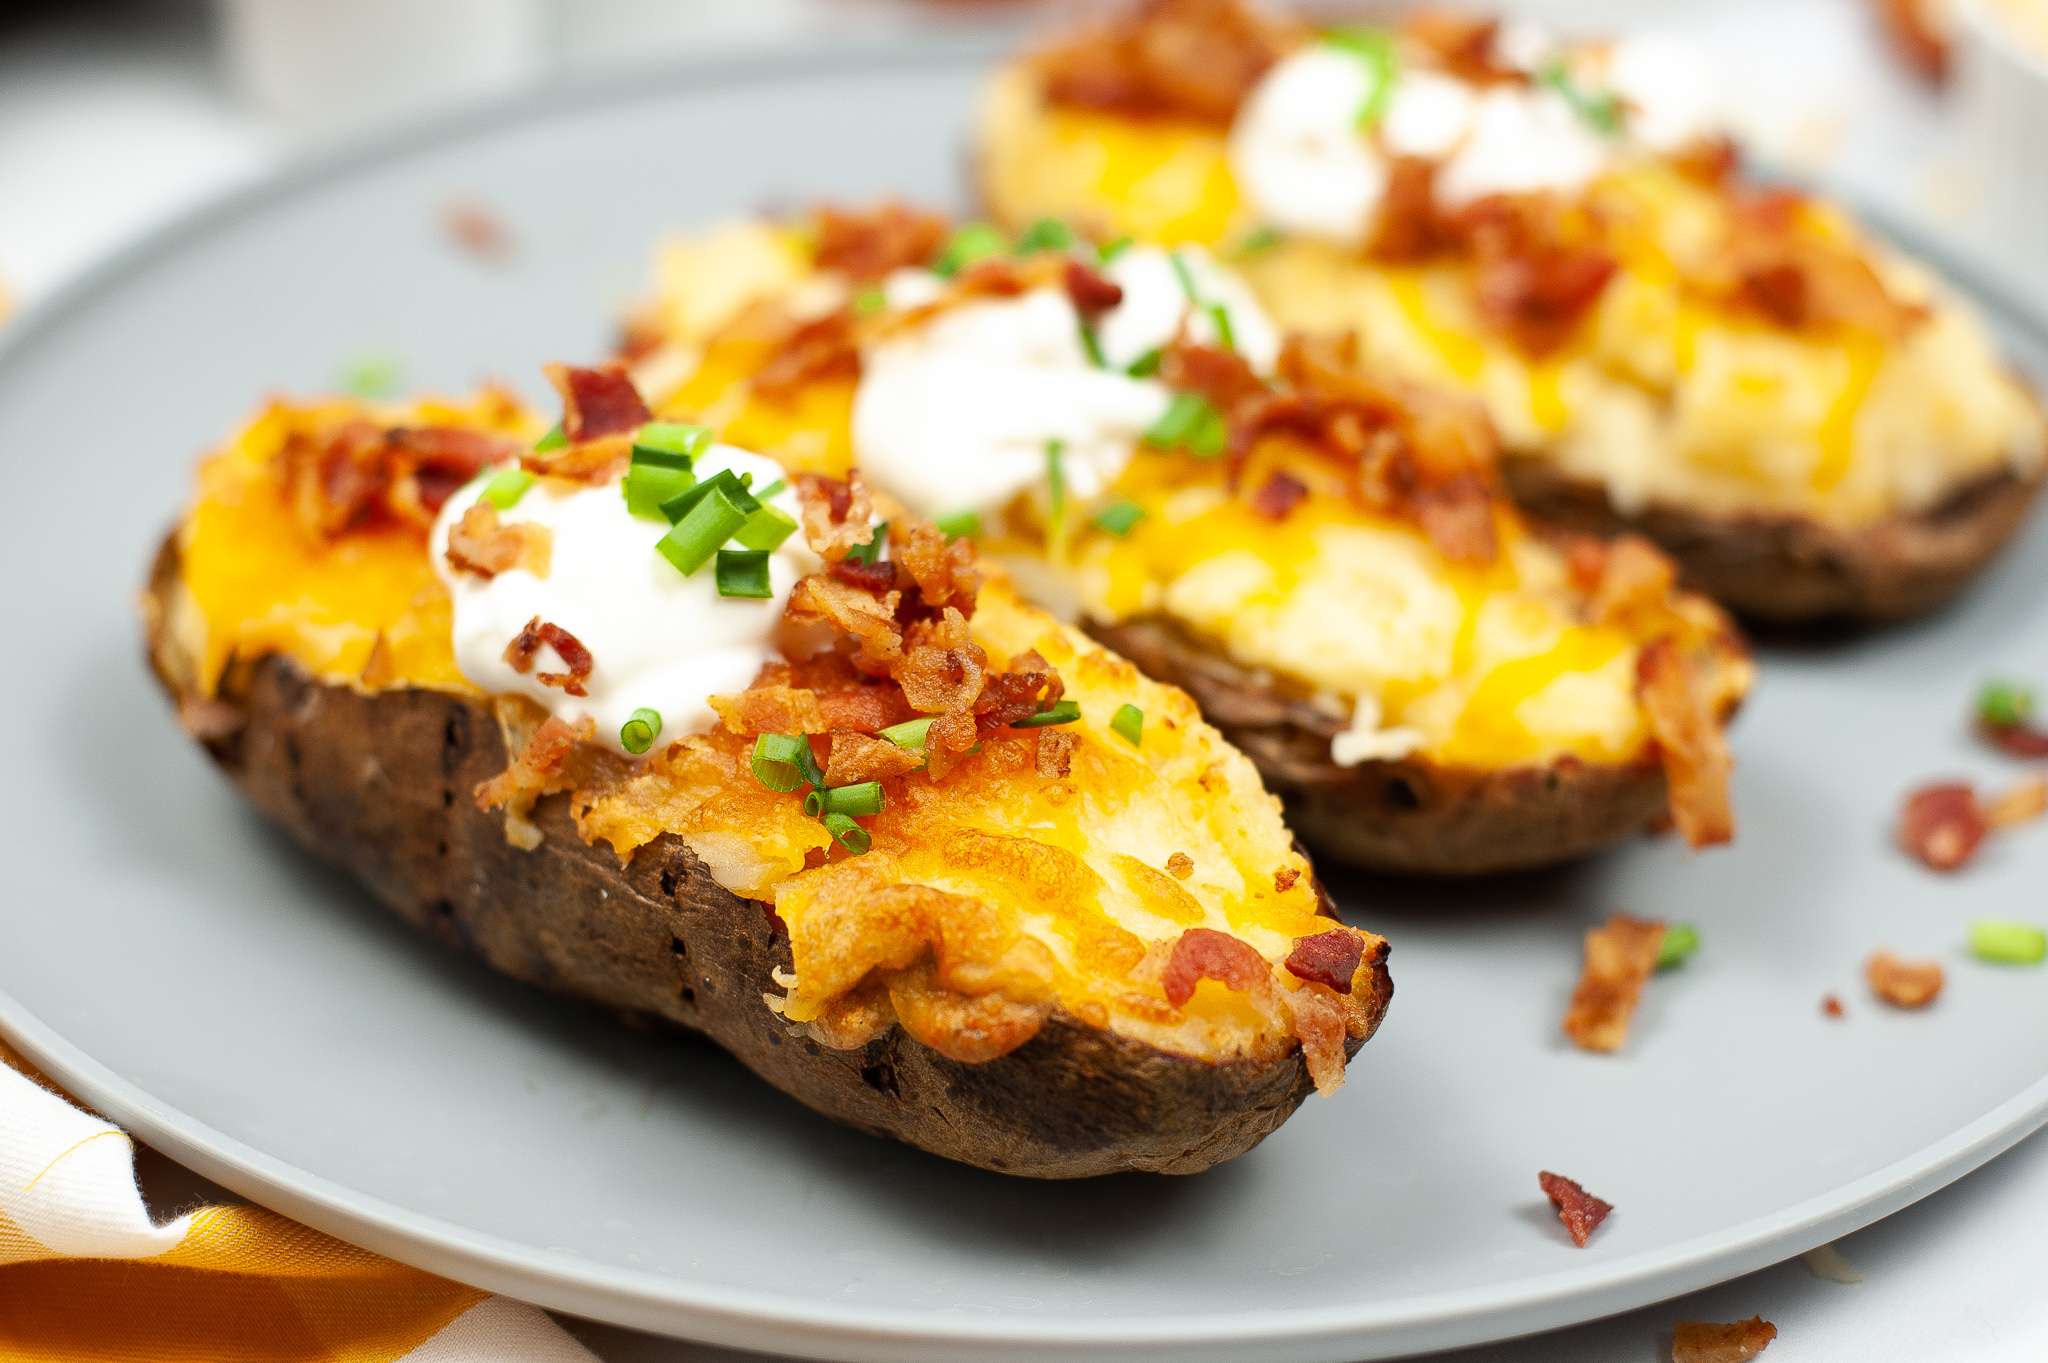 Twice baked potatoes on a plate topped with bacon pieces and sour cream ready to serve.